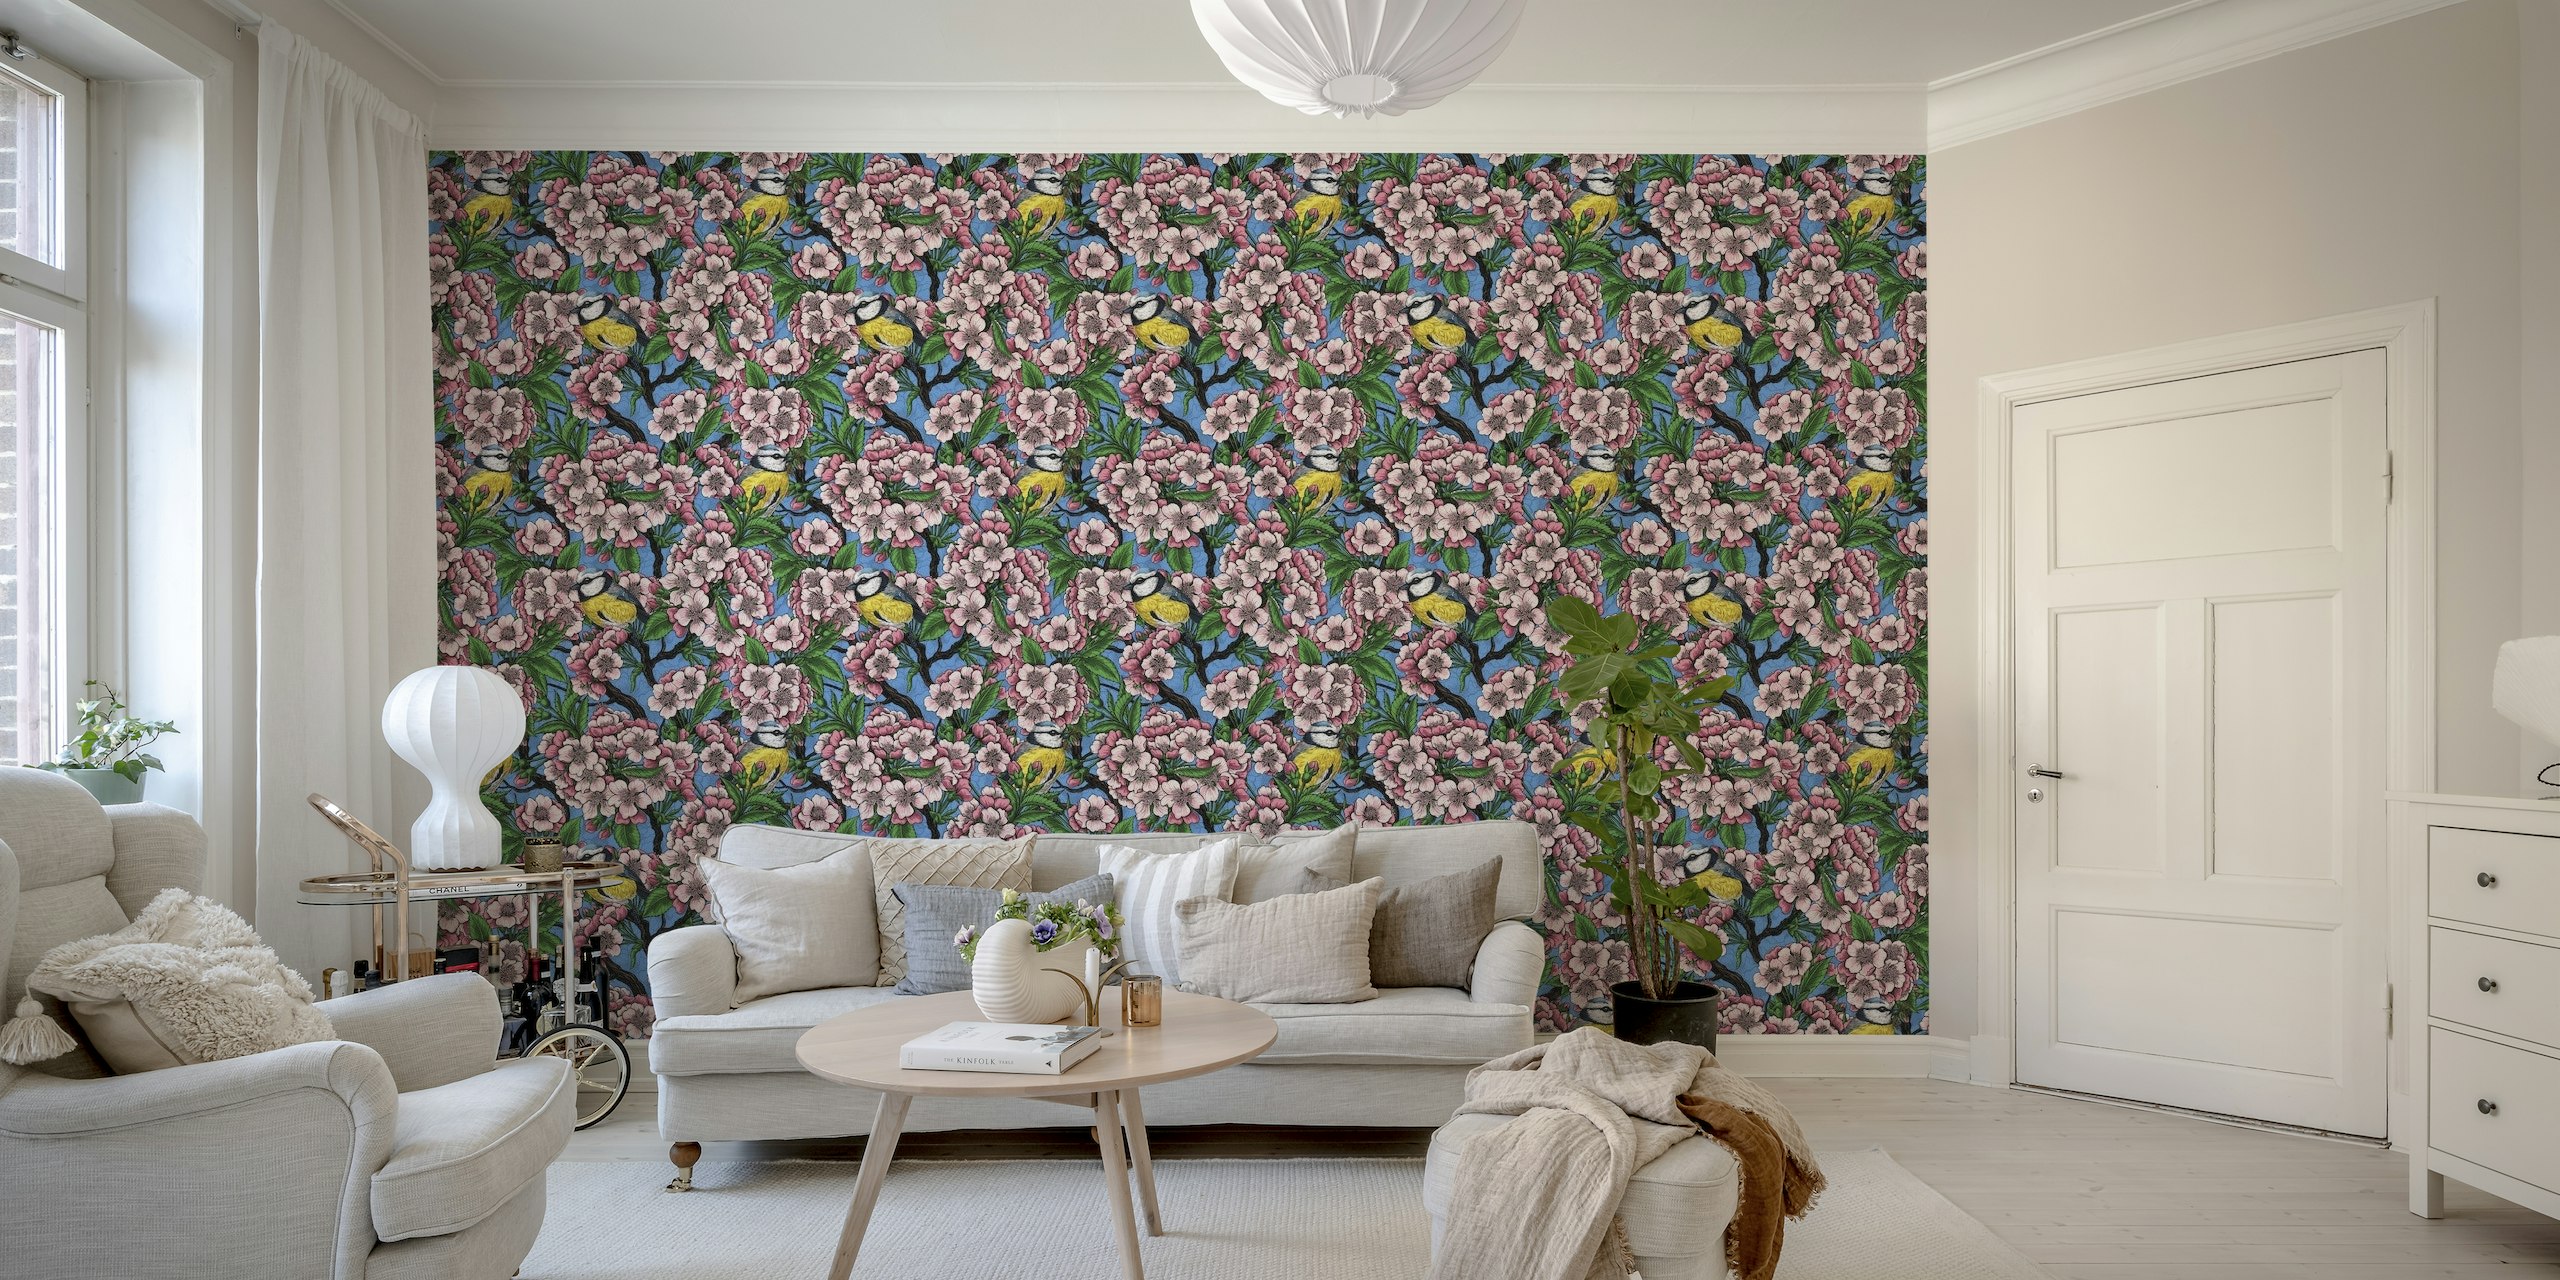 Cherry blossom and birds wall mural with pink florals and yellow birds on a white background